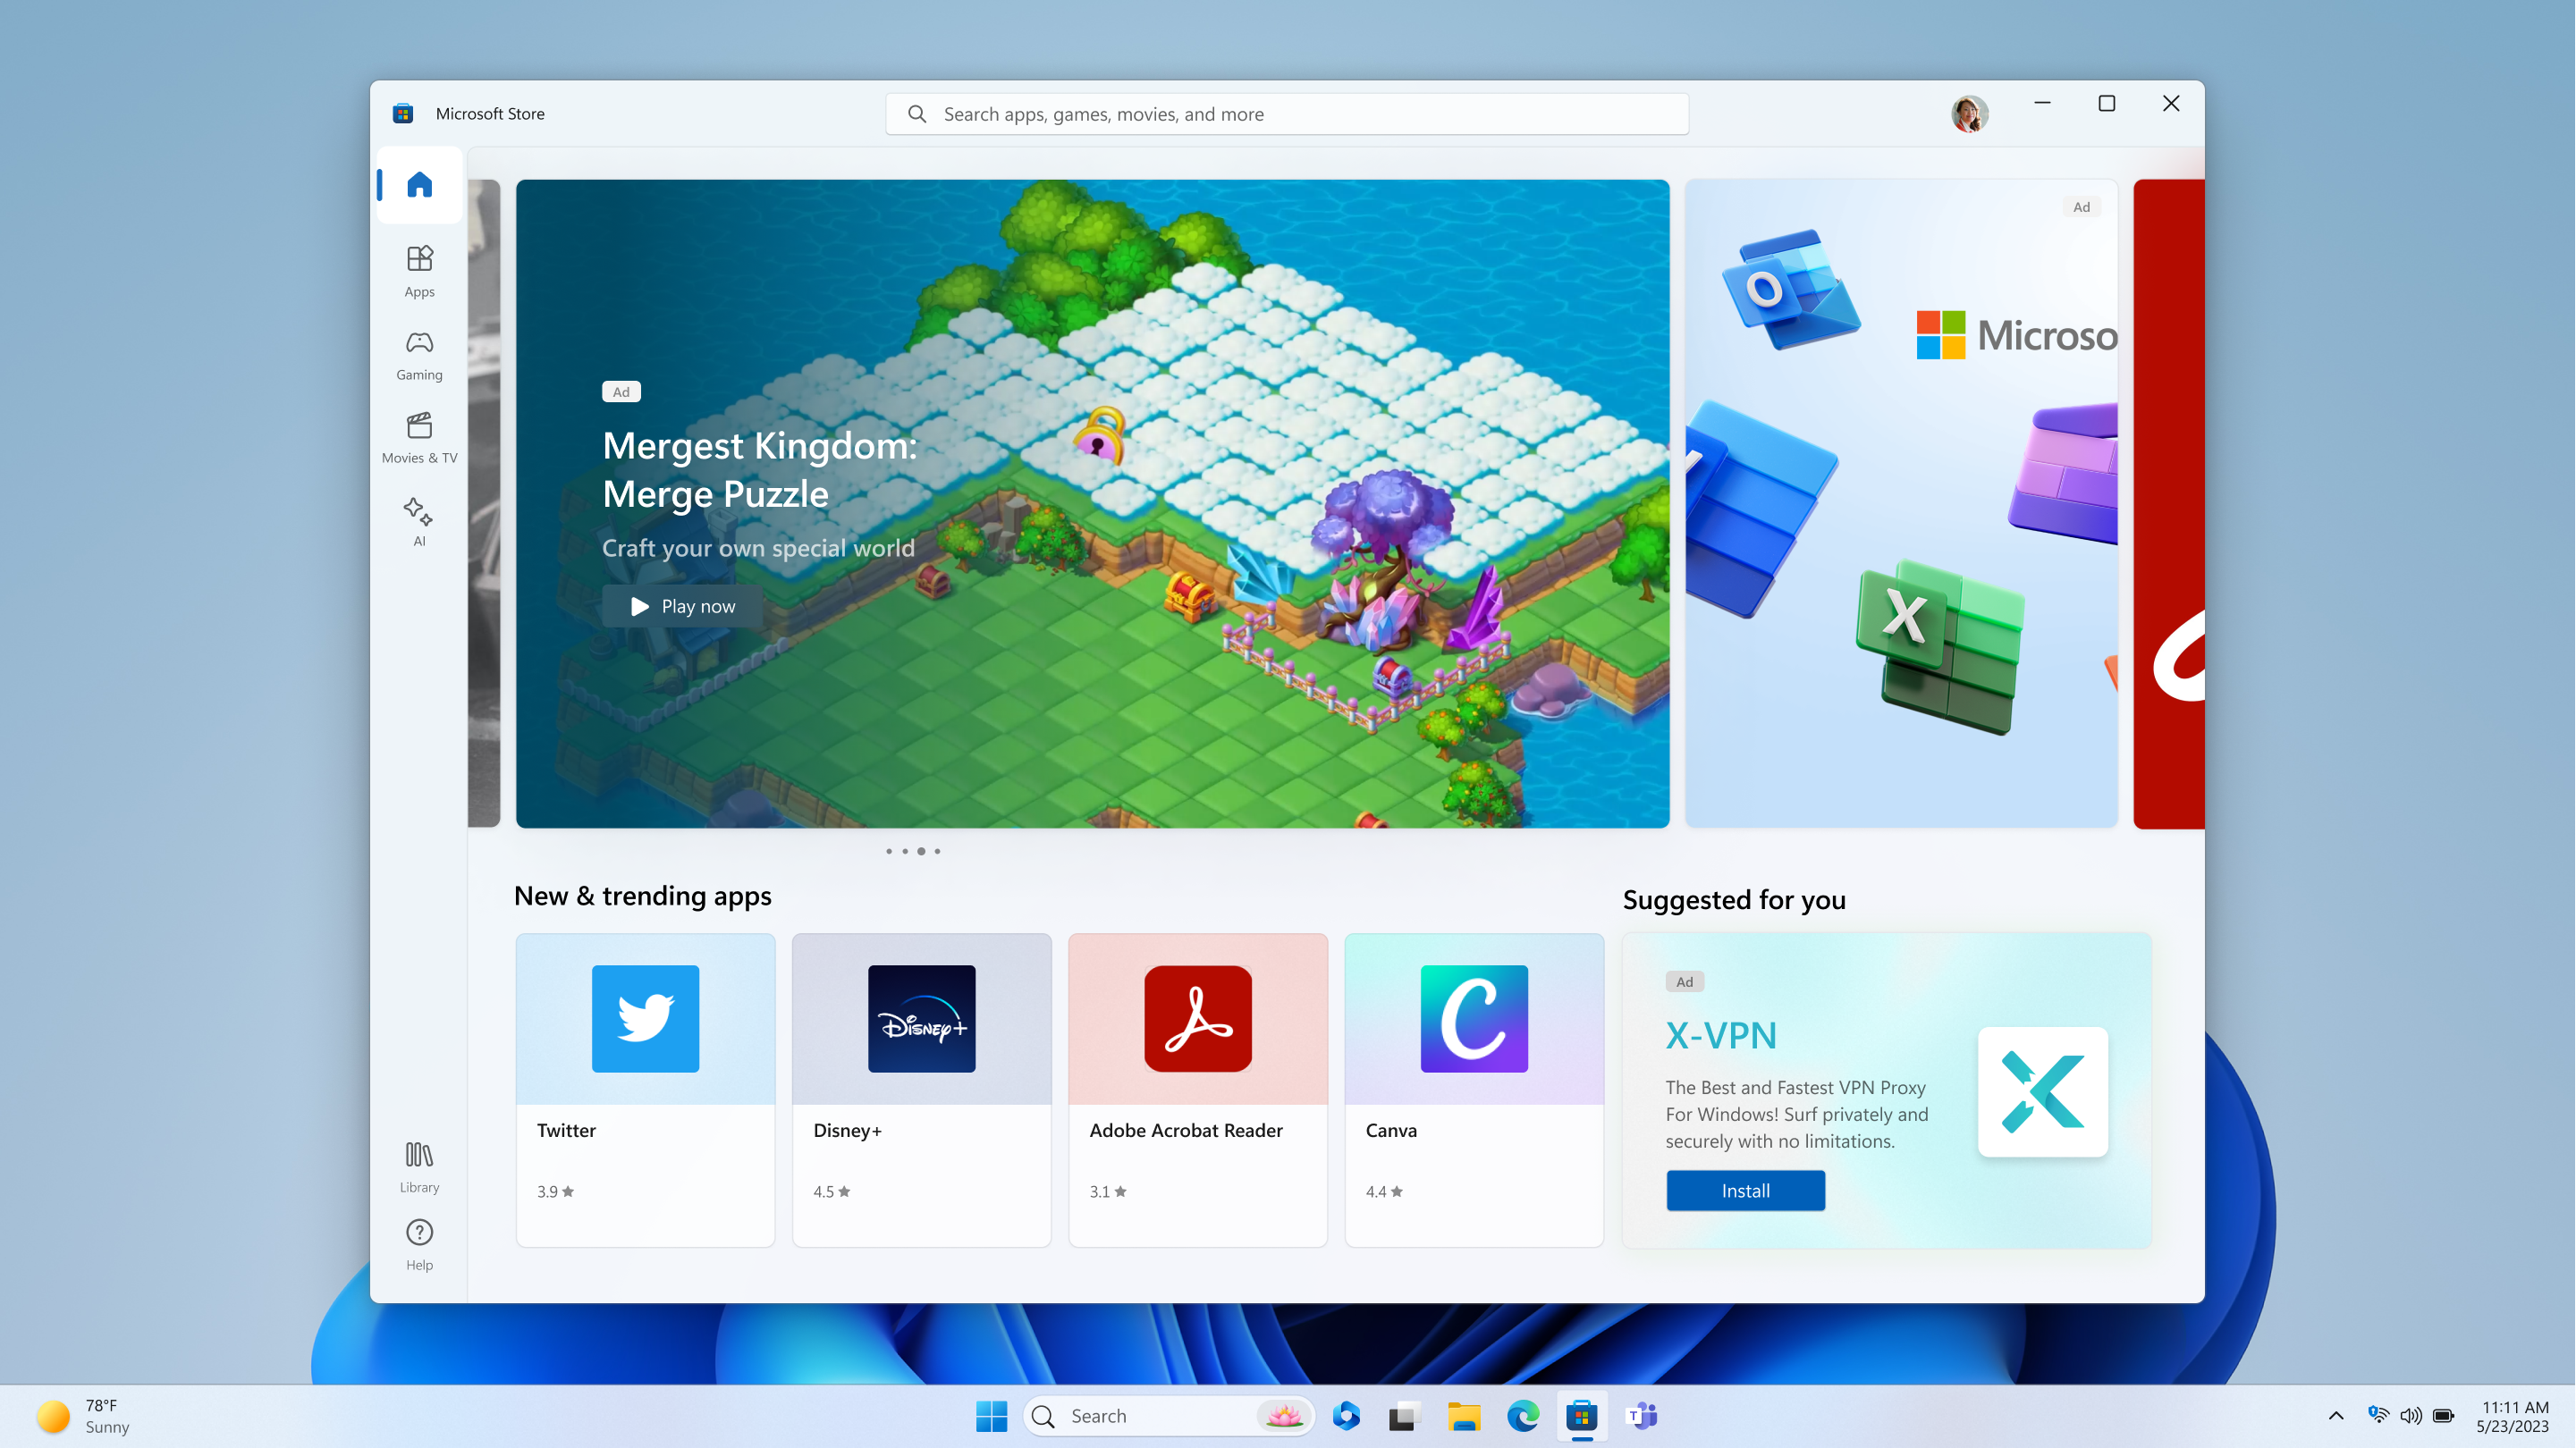 Screenshot of a Microsoft Store ad shown in the Spotlight section